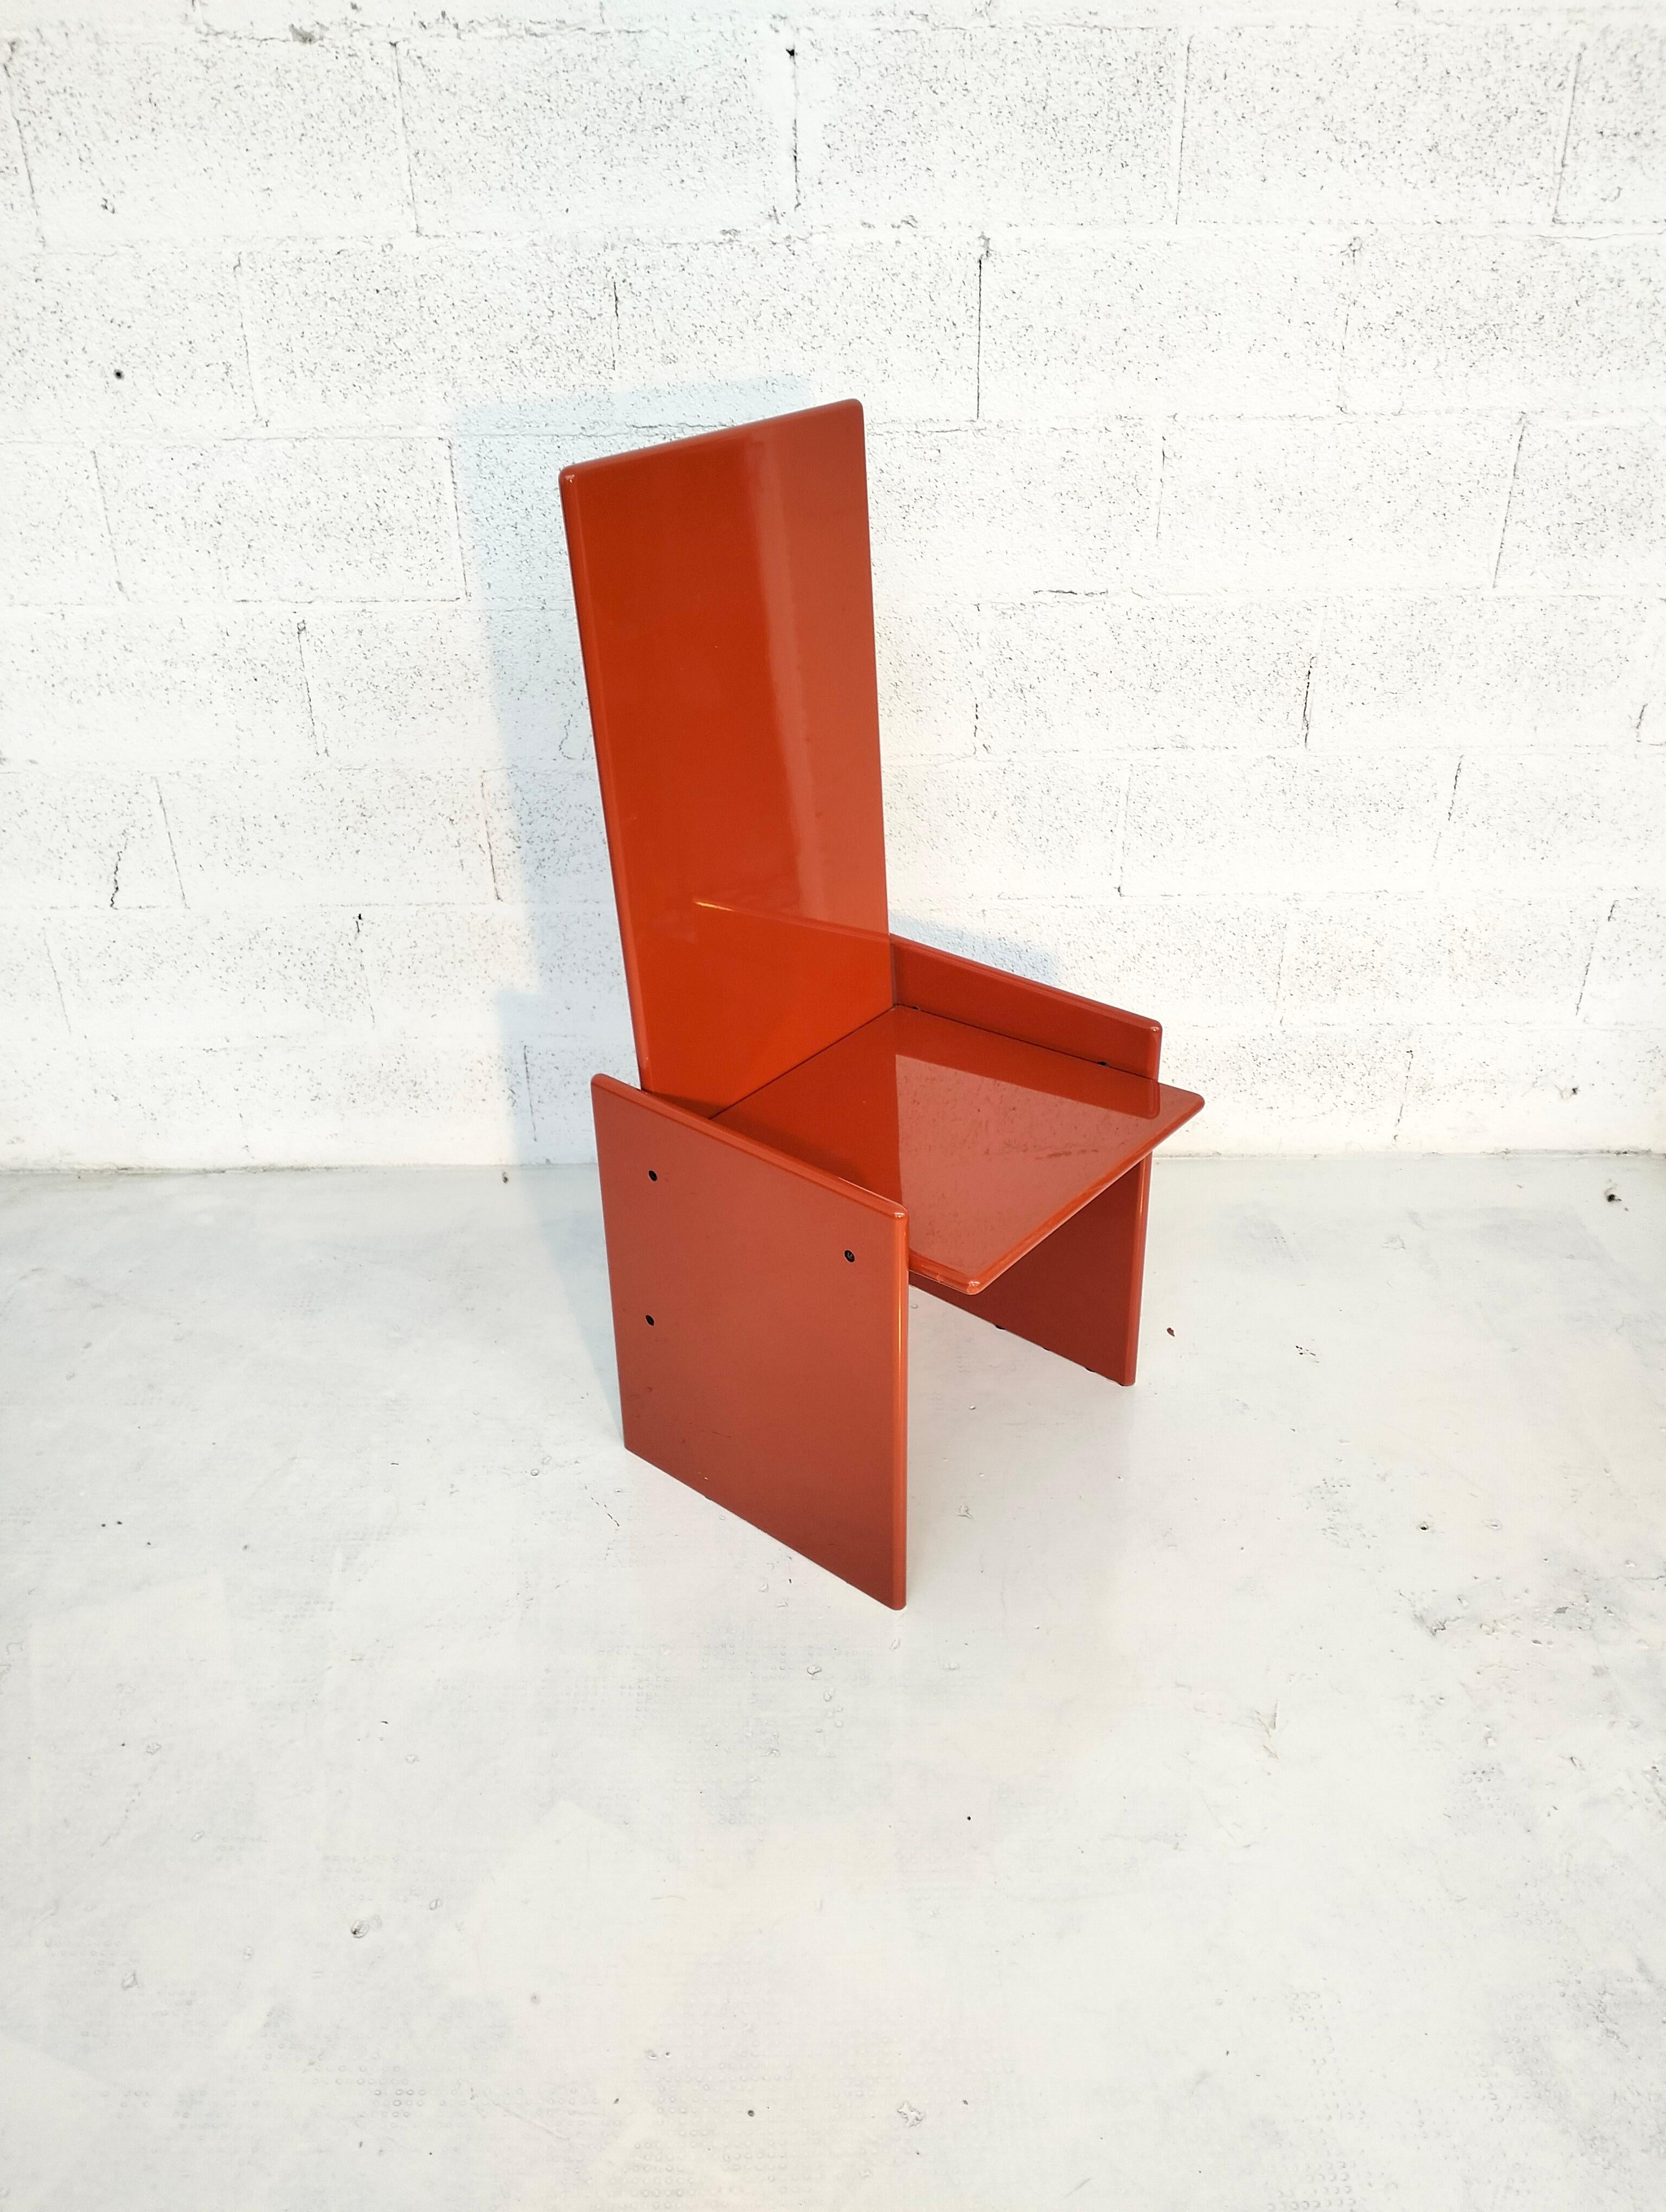 Structure in glossy lacquered wood. The first standard modern piece of furniture on which the glossy lacquer was applied; a timeless chair, composed of slightly rounded panels.

Kazuhide Takahama (Nobeoka, 1930 - Bologna, February 10, 2010 [was a